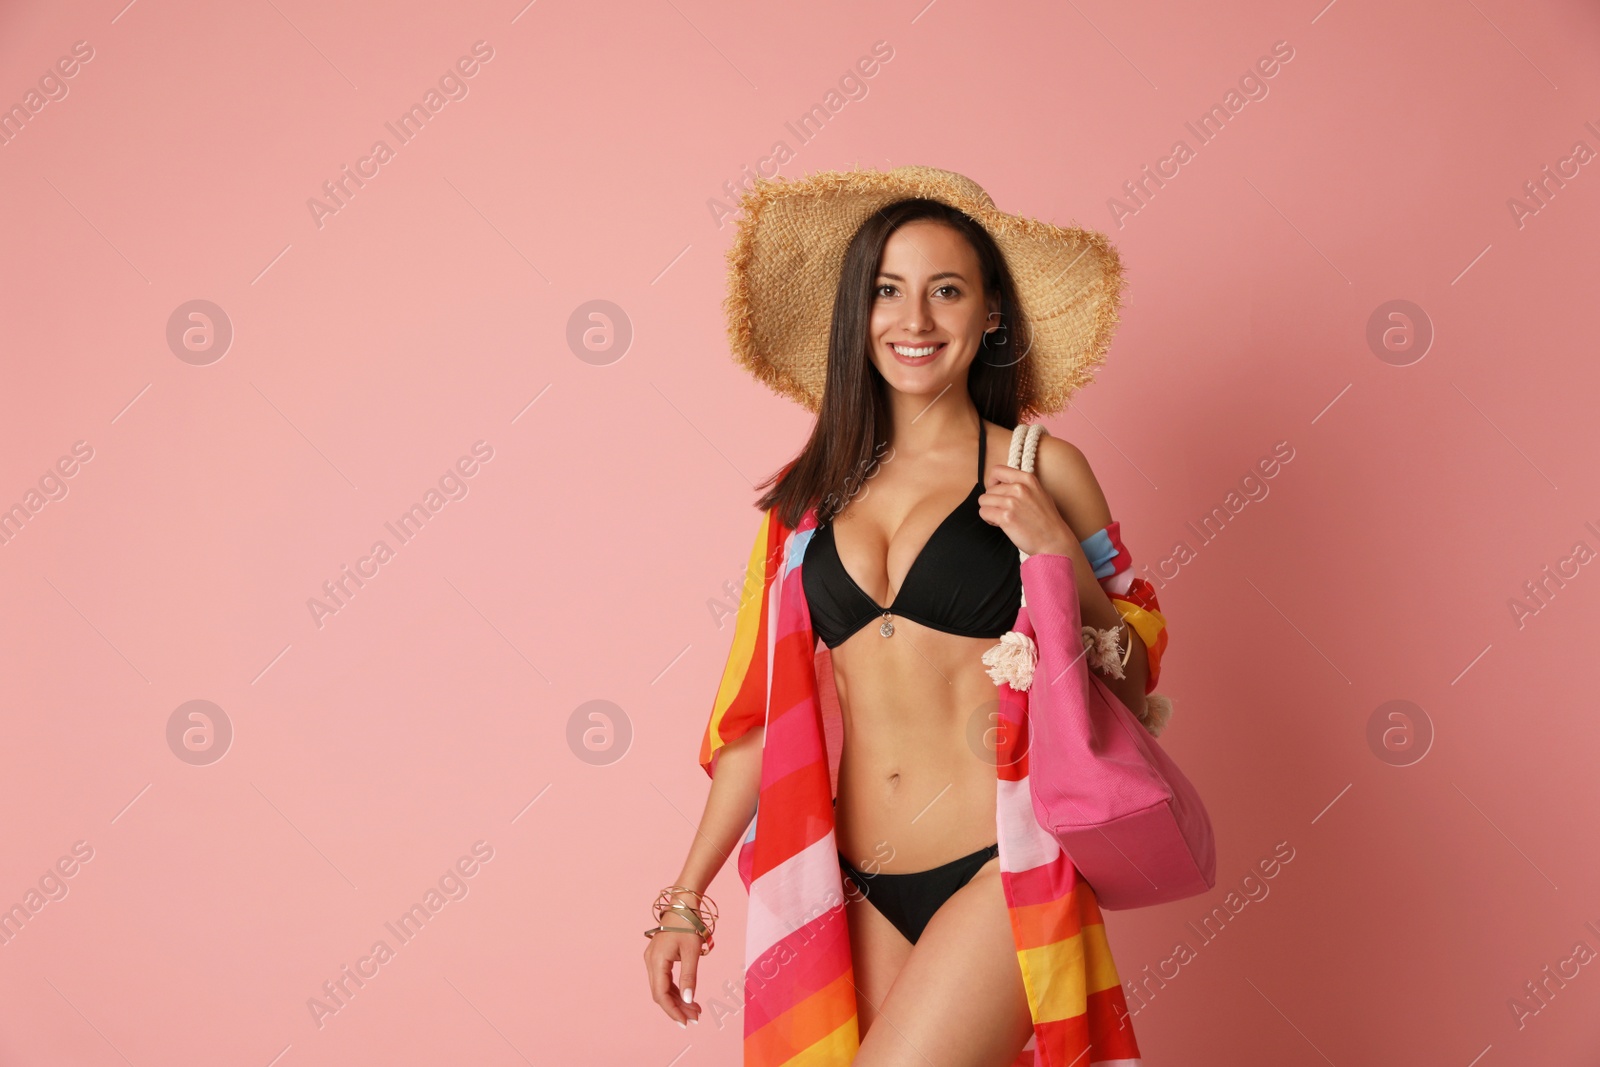 Photo of Pretty sexy woman with slim body in stylish black bikini on coral background, space for text